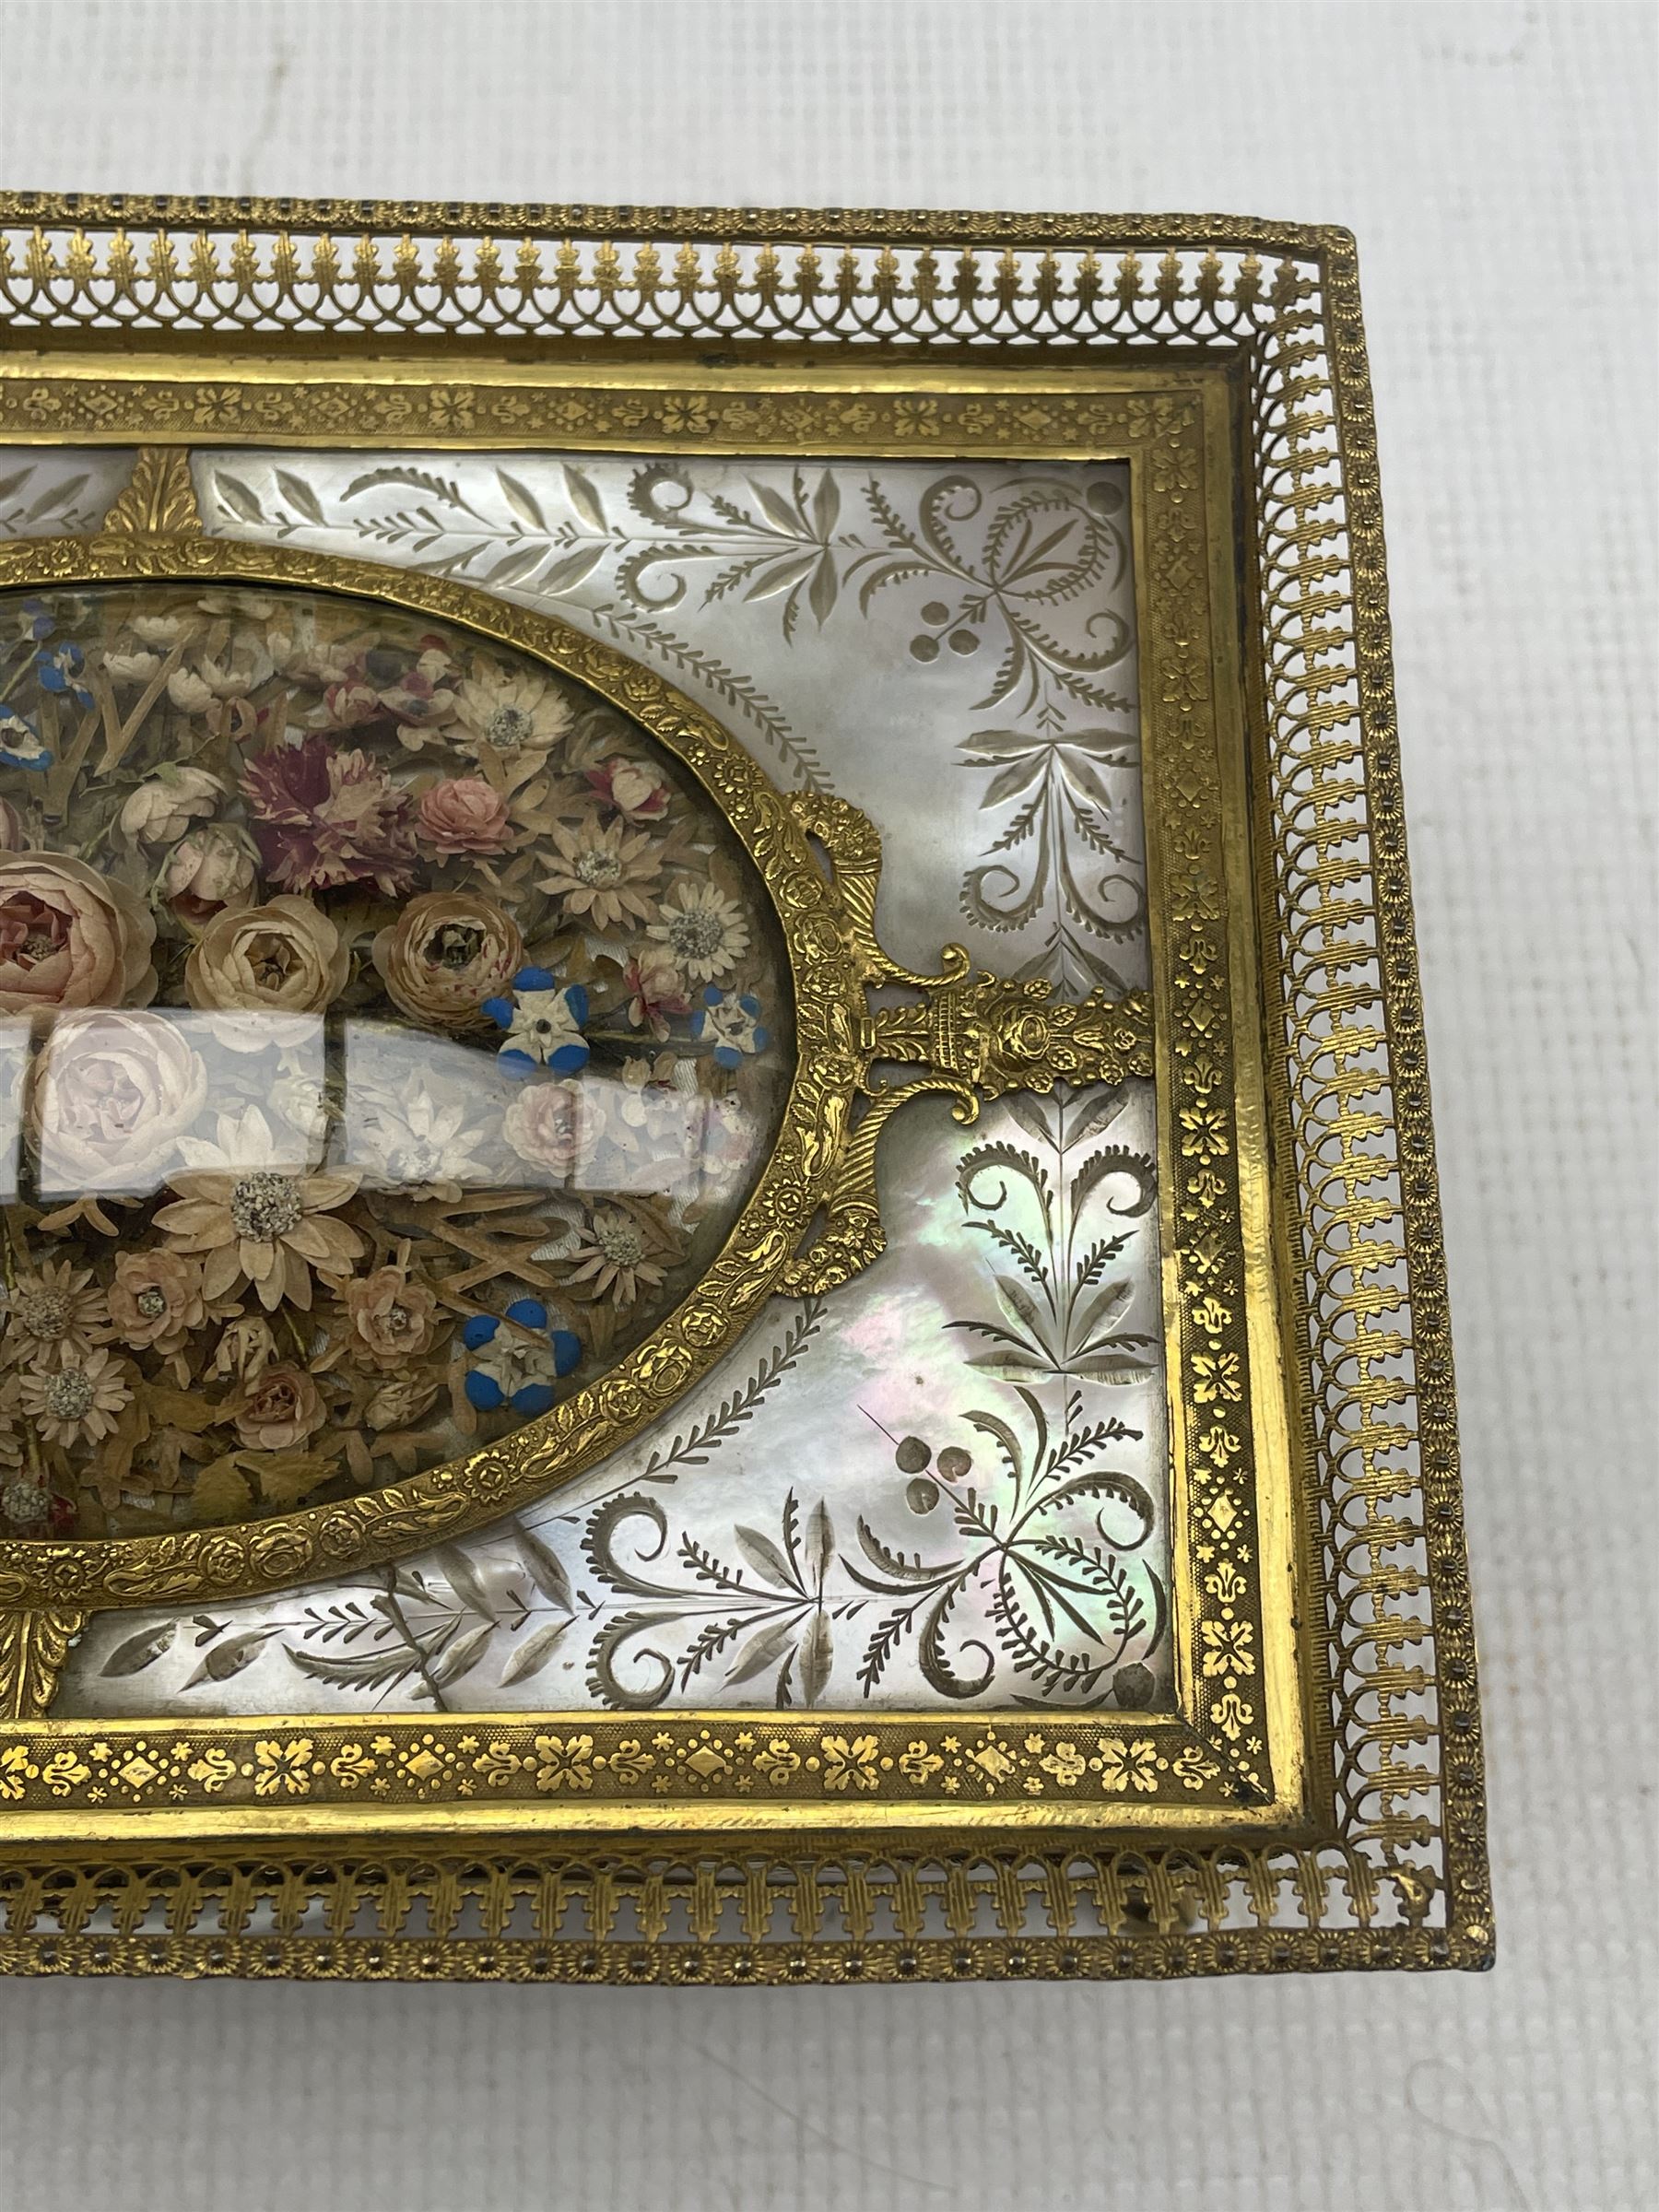 Early 19th century French Palais Royal type ormolu and mother-of-pearl musical sewing etui - Image 11 of 19